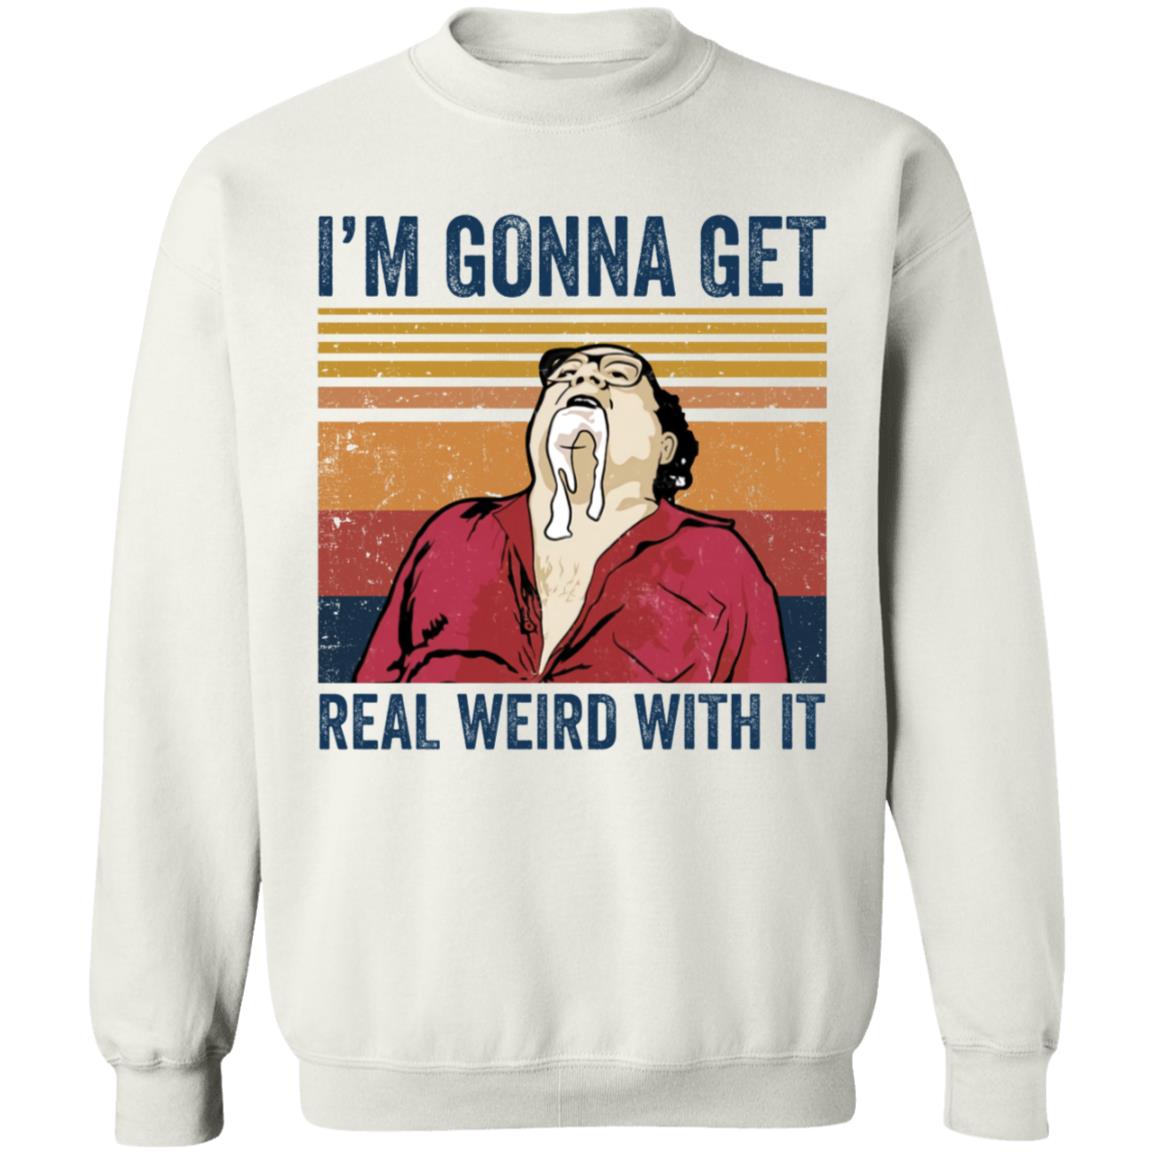 Frank Reynolds I’m gonna get real weird with it shirt - Rockatee